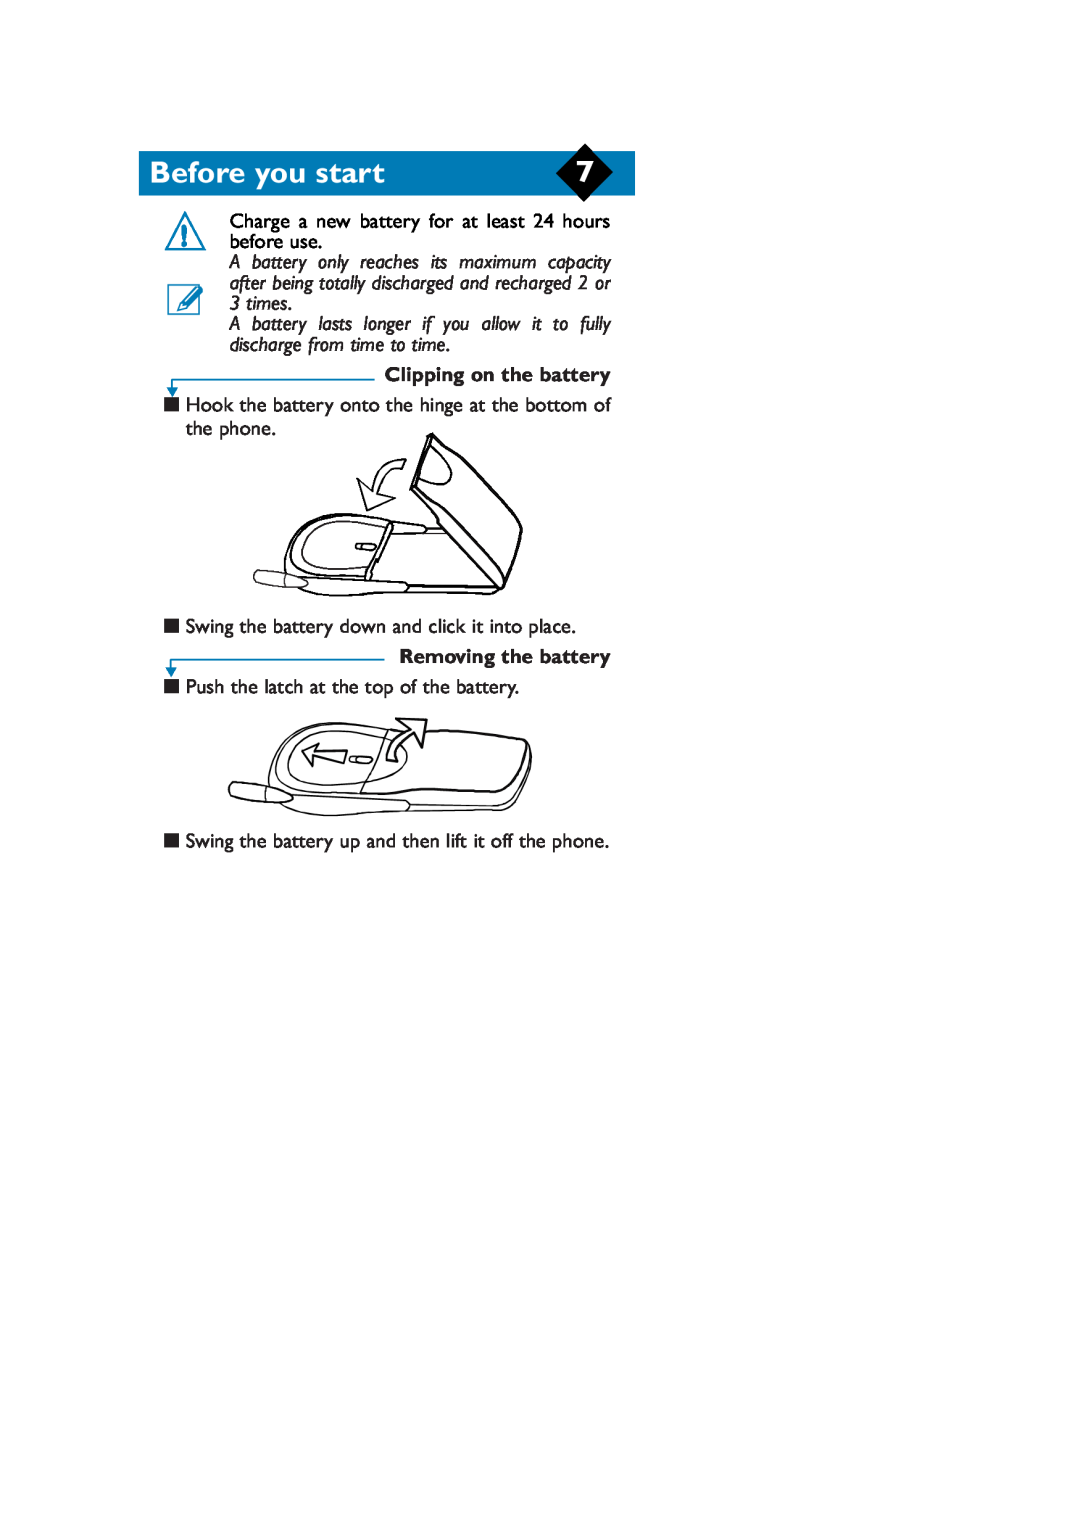 Philips TCD808/A9 user manual Clipping on the battery, Removing the battery, Before you start 